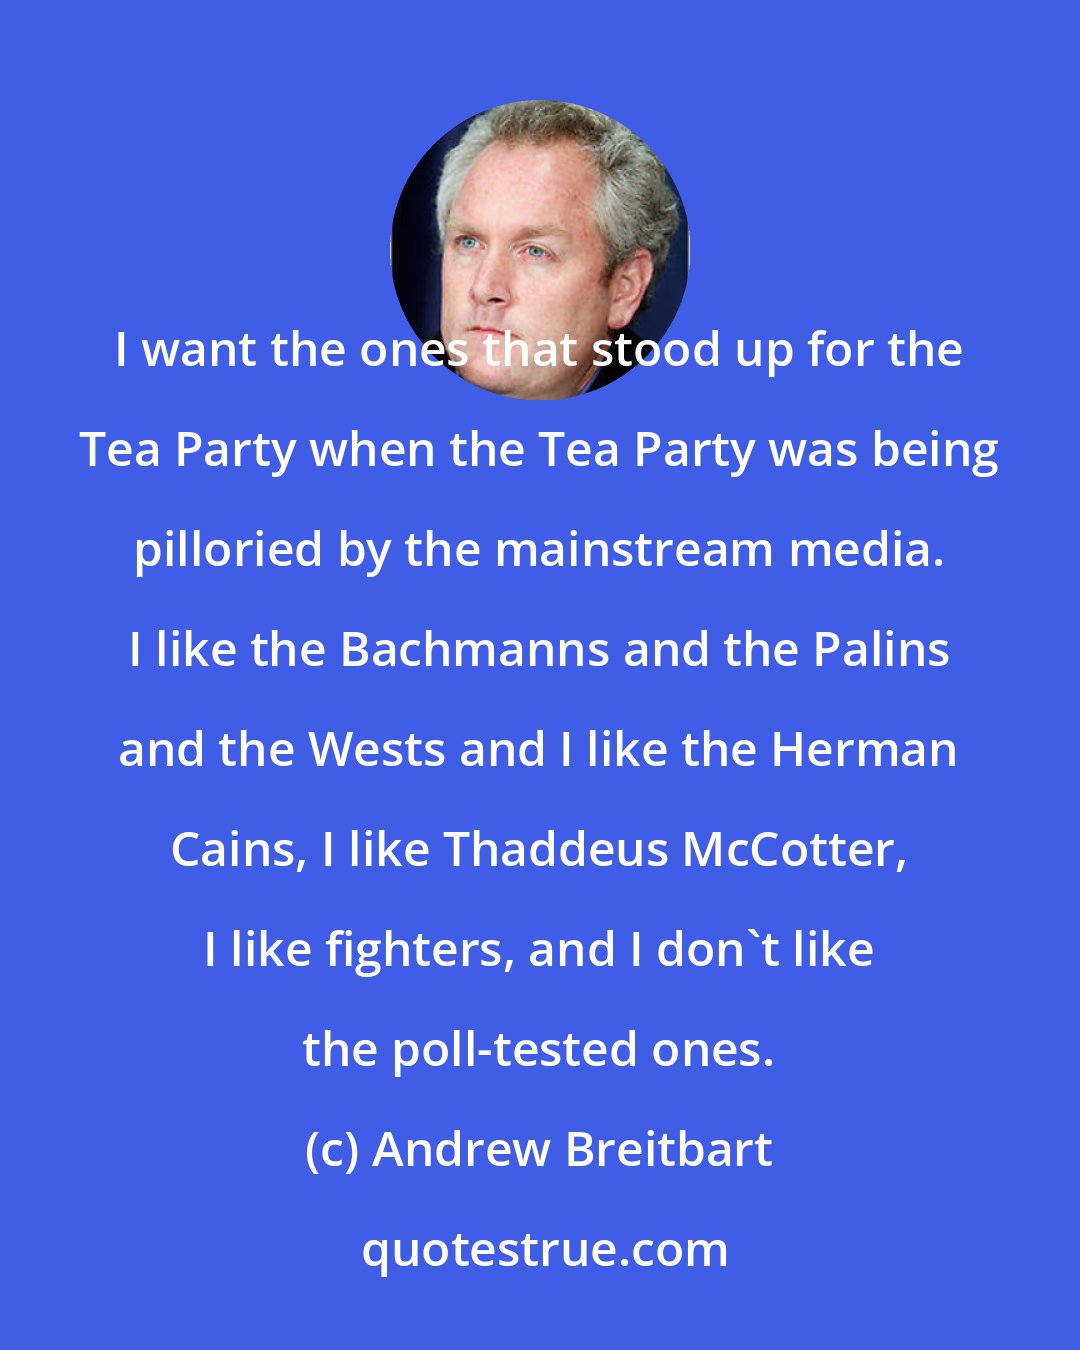 Andrew Breitbart: I want the ones that stood up for the Tea Party when the Tea Party was being pilloried by the mainstream media. I like the Bachmanns and the Palins and the Wests and I like the Herman Cains, I like Thaddeus McCotter, I like fighters, and I don't like the poll-tested ones.